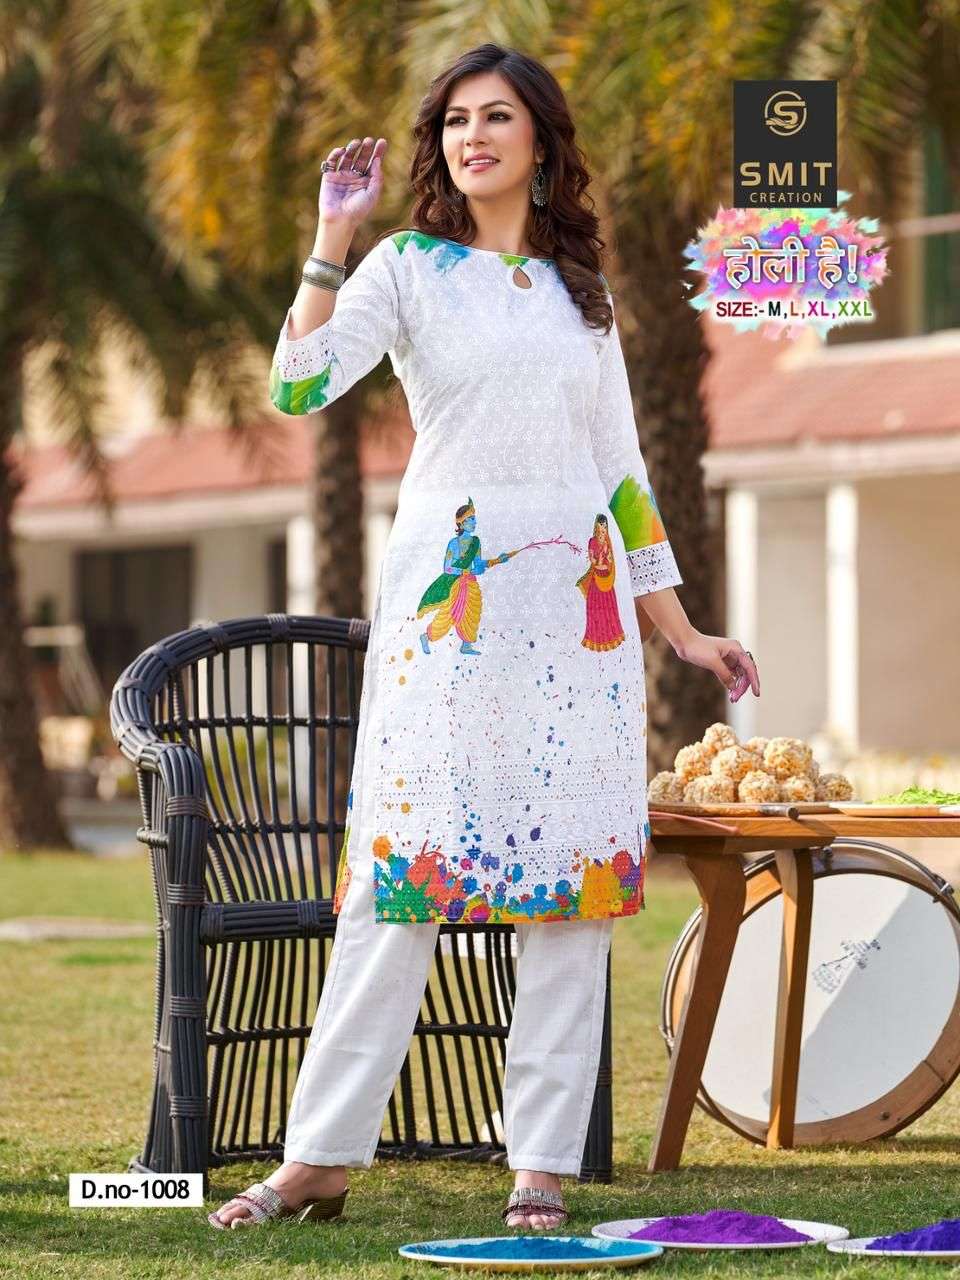 HOLI HAI BY SMIT CREATION 1001 TO 1006 SERIES DESIGNER STYLISH FANCY COLORFUL BEAUTIFUL PARTY WEAR & ETHNIC WEAR COLLECTION COTTON PRINT KURTIS AT WHOLESALE PRICE